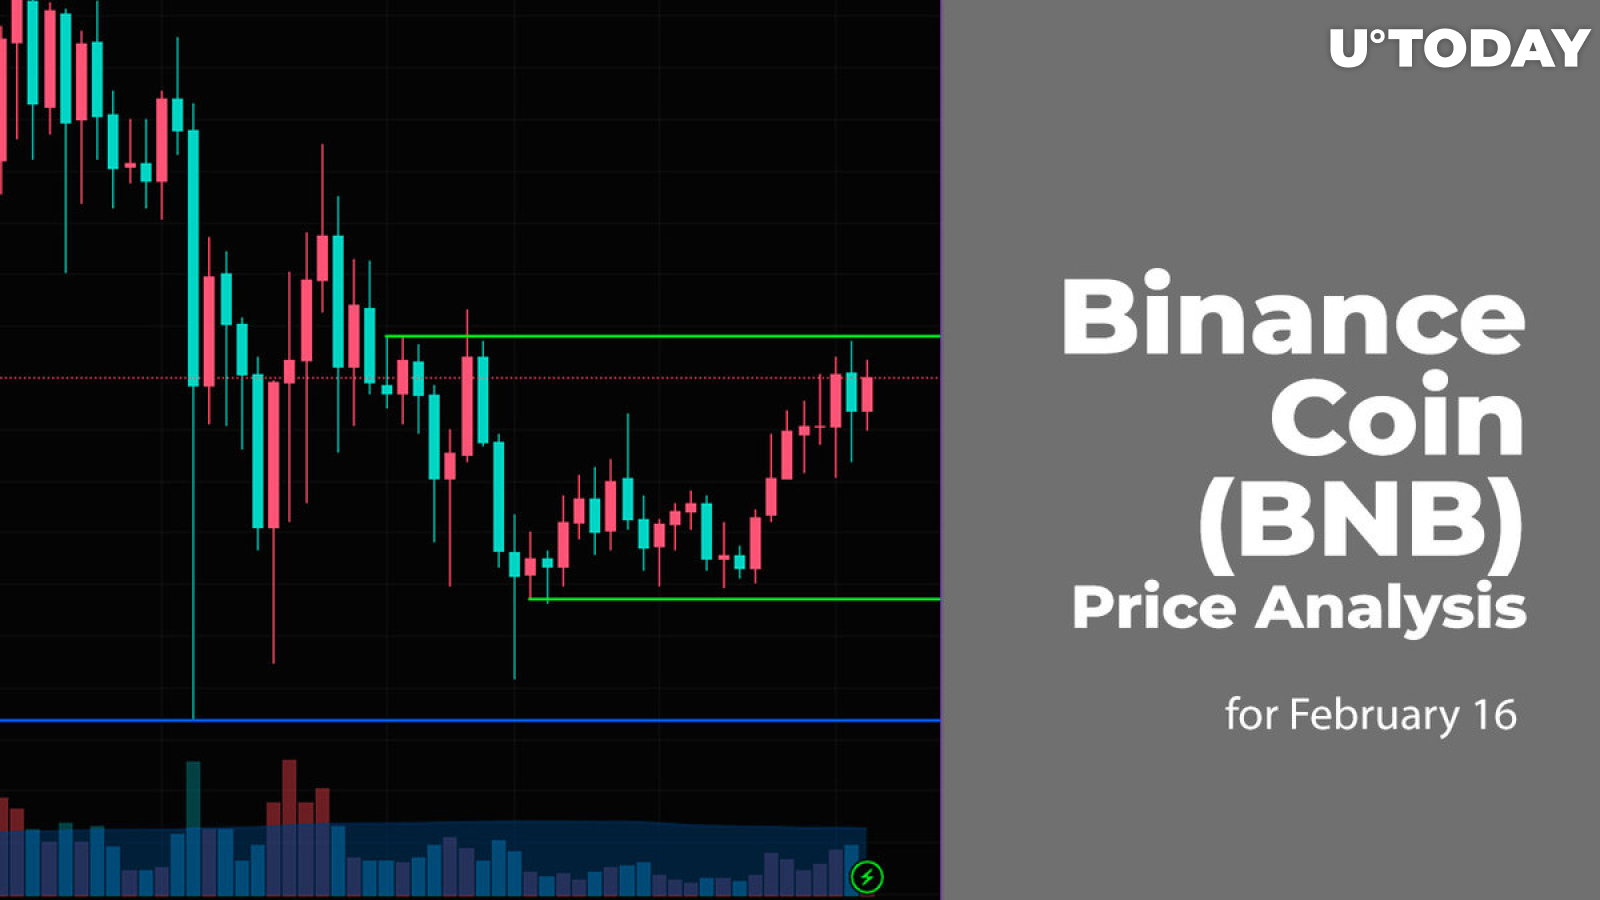 Binance Coin (BNB) Price Prediction for February 16